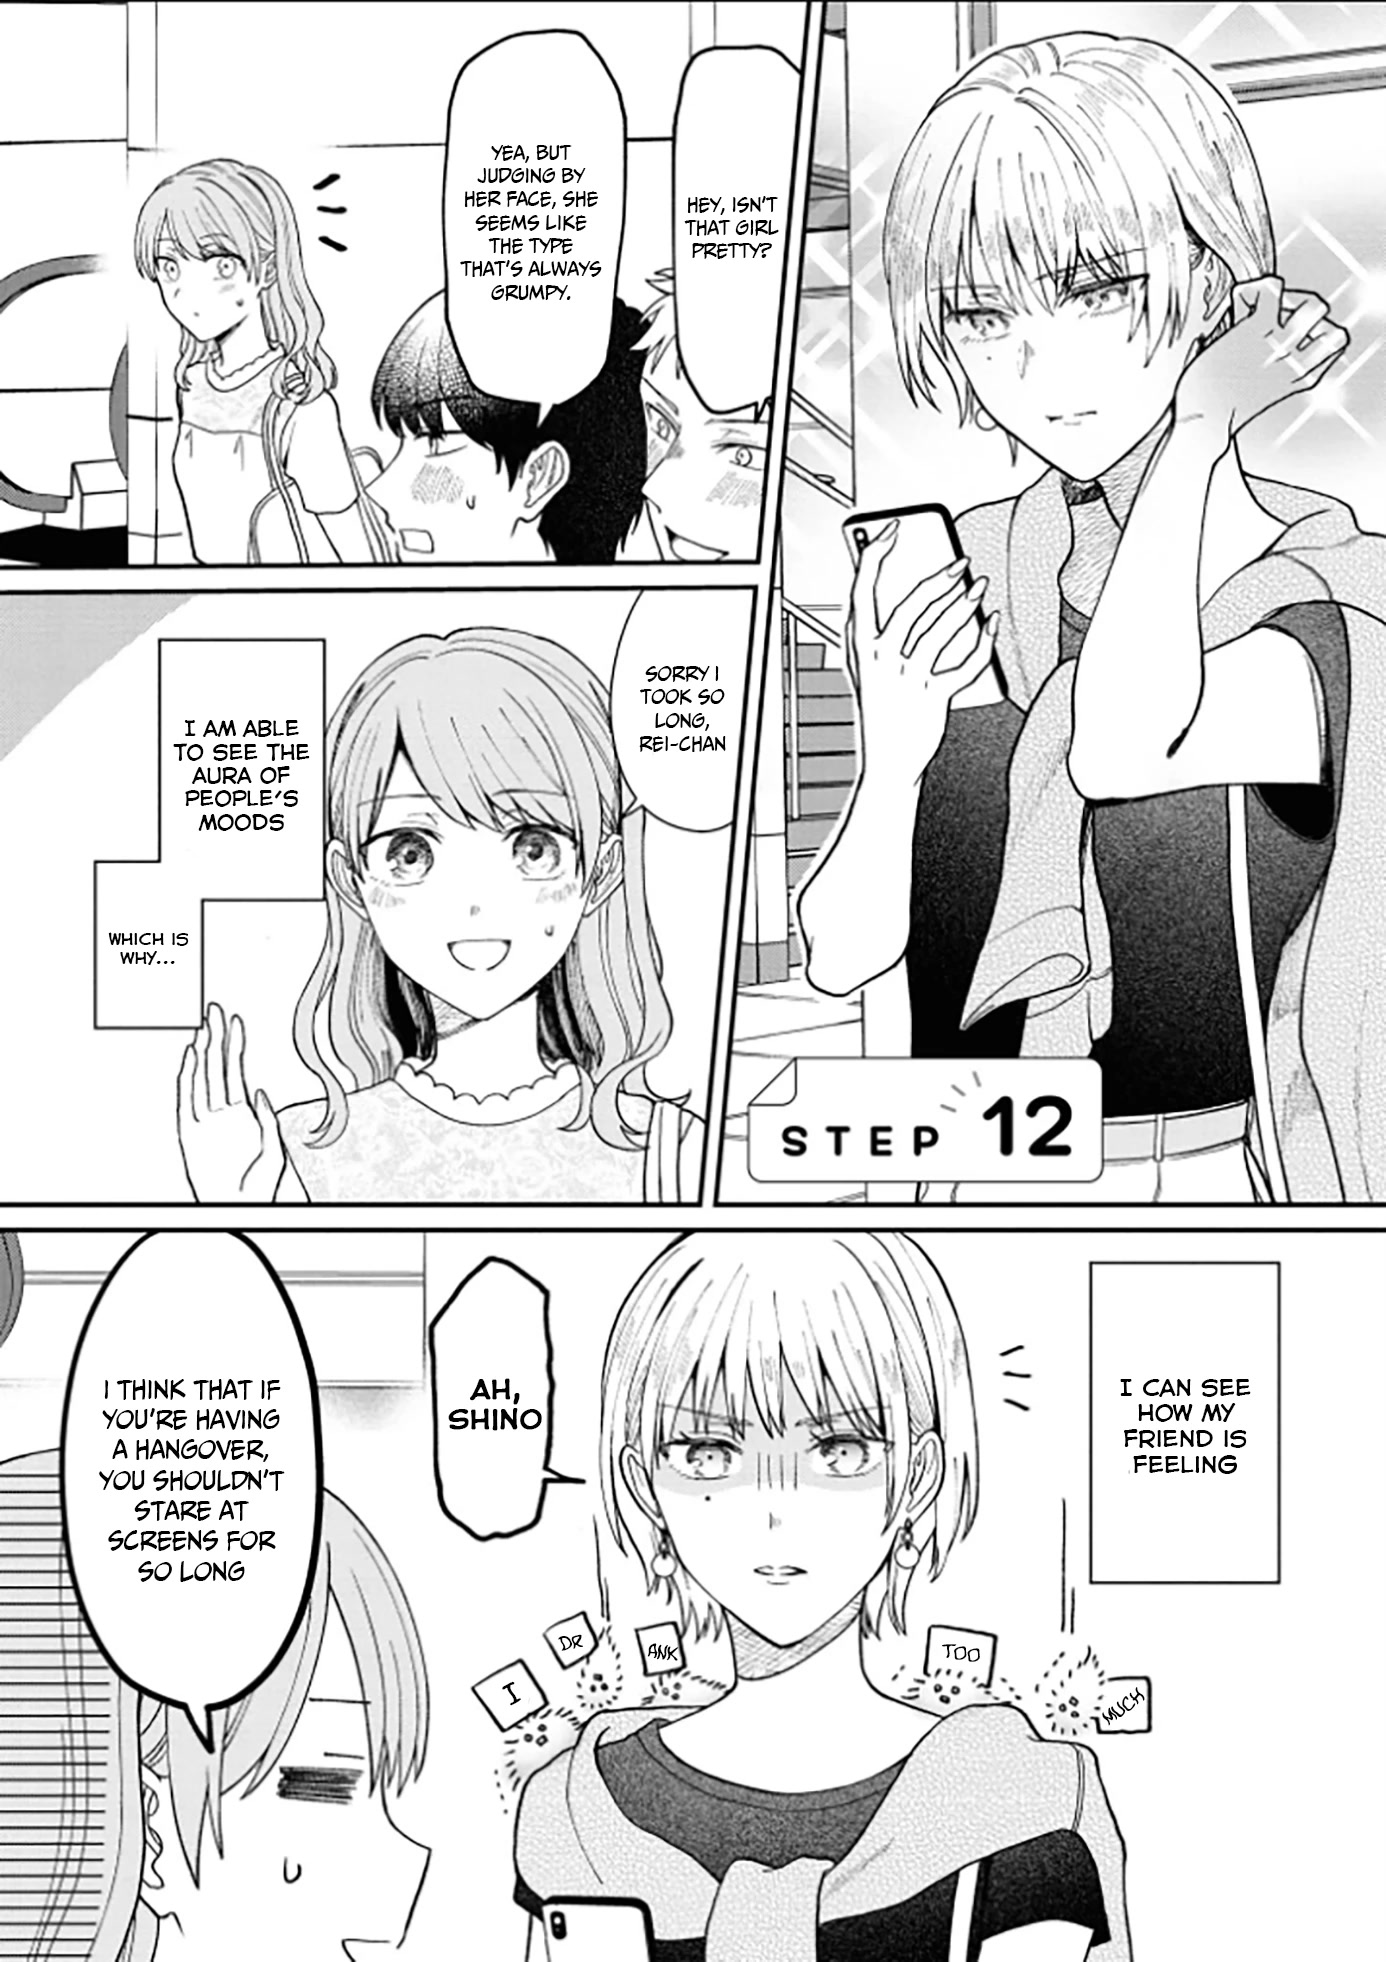 The New-Hire Who Could "Read" Emotions and the Unsociable Senpai - chapter 12 - #2